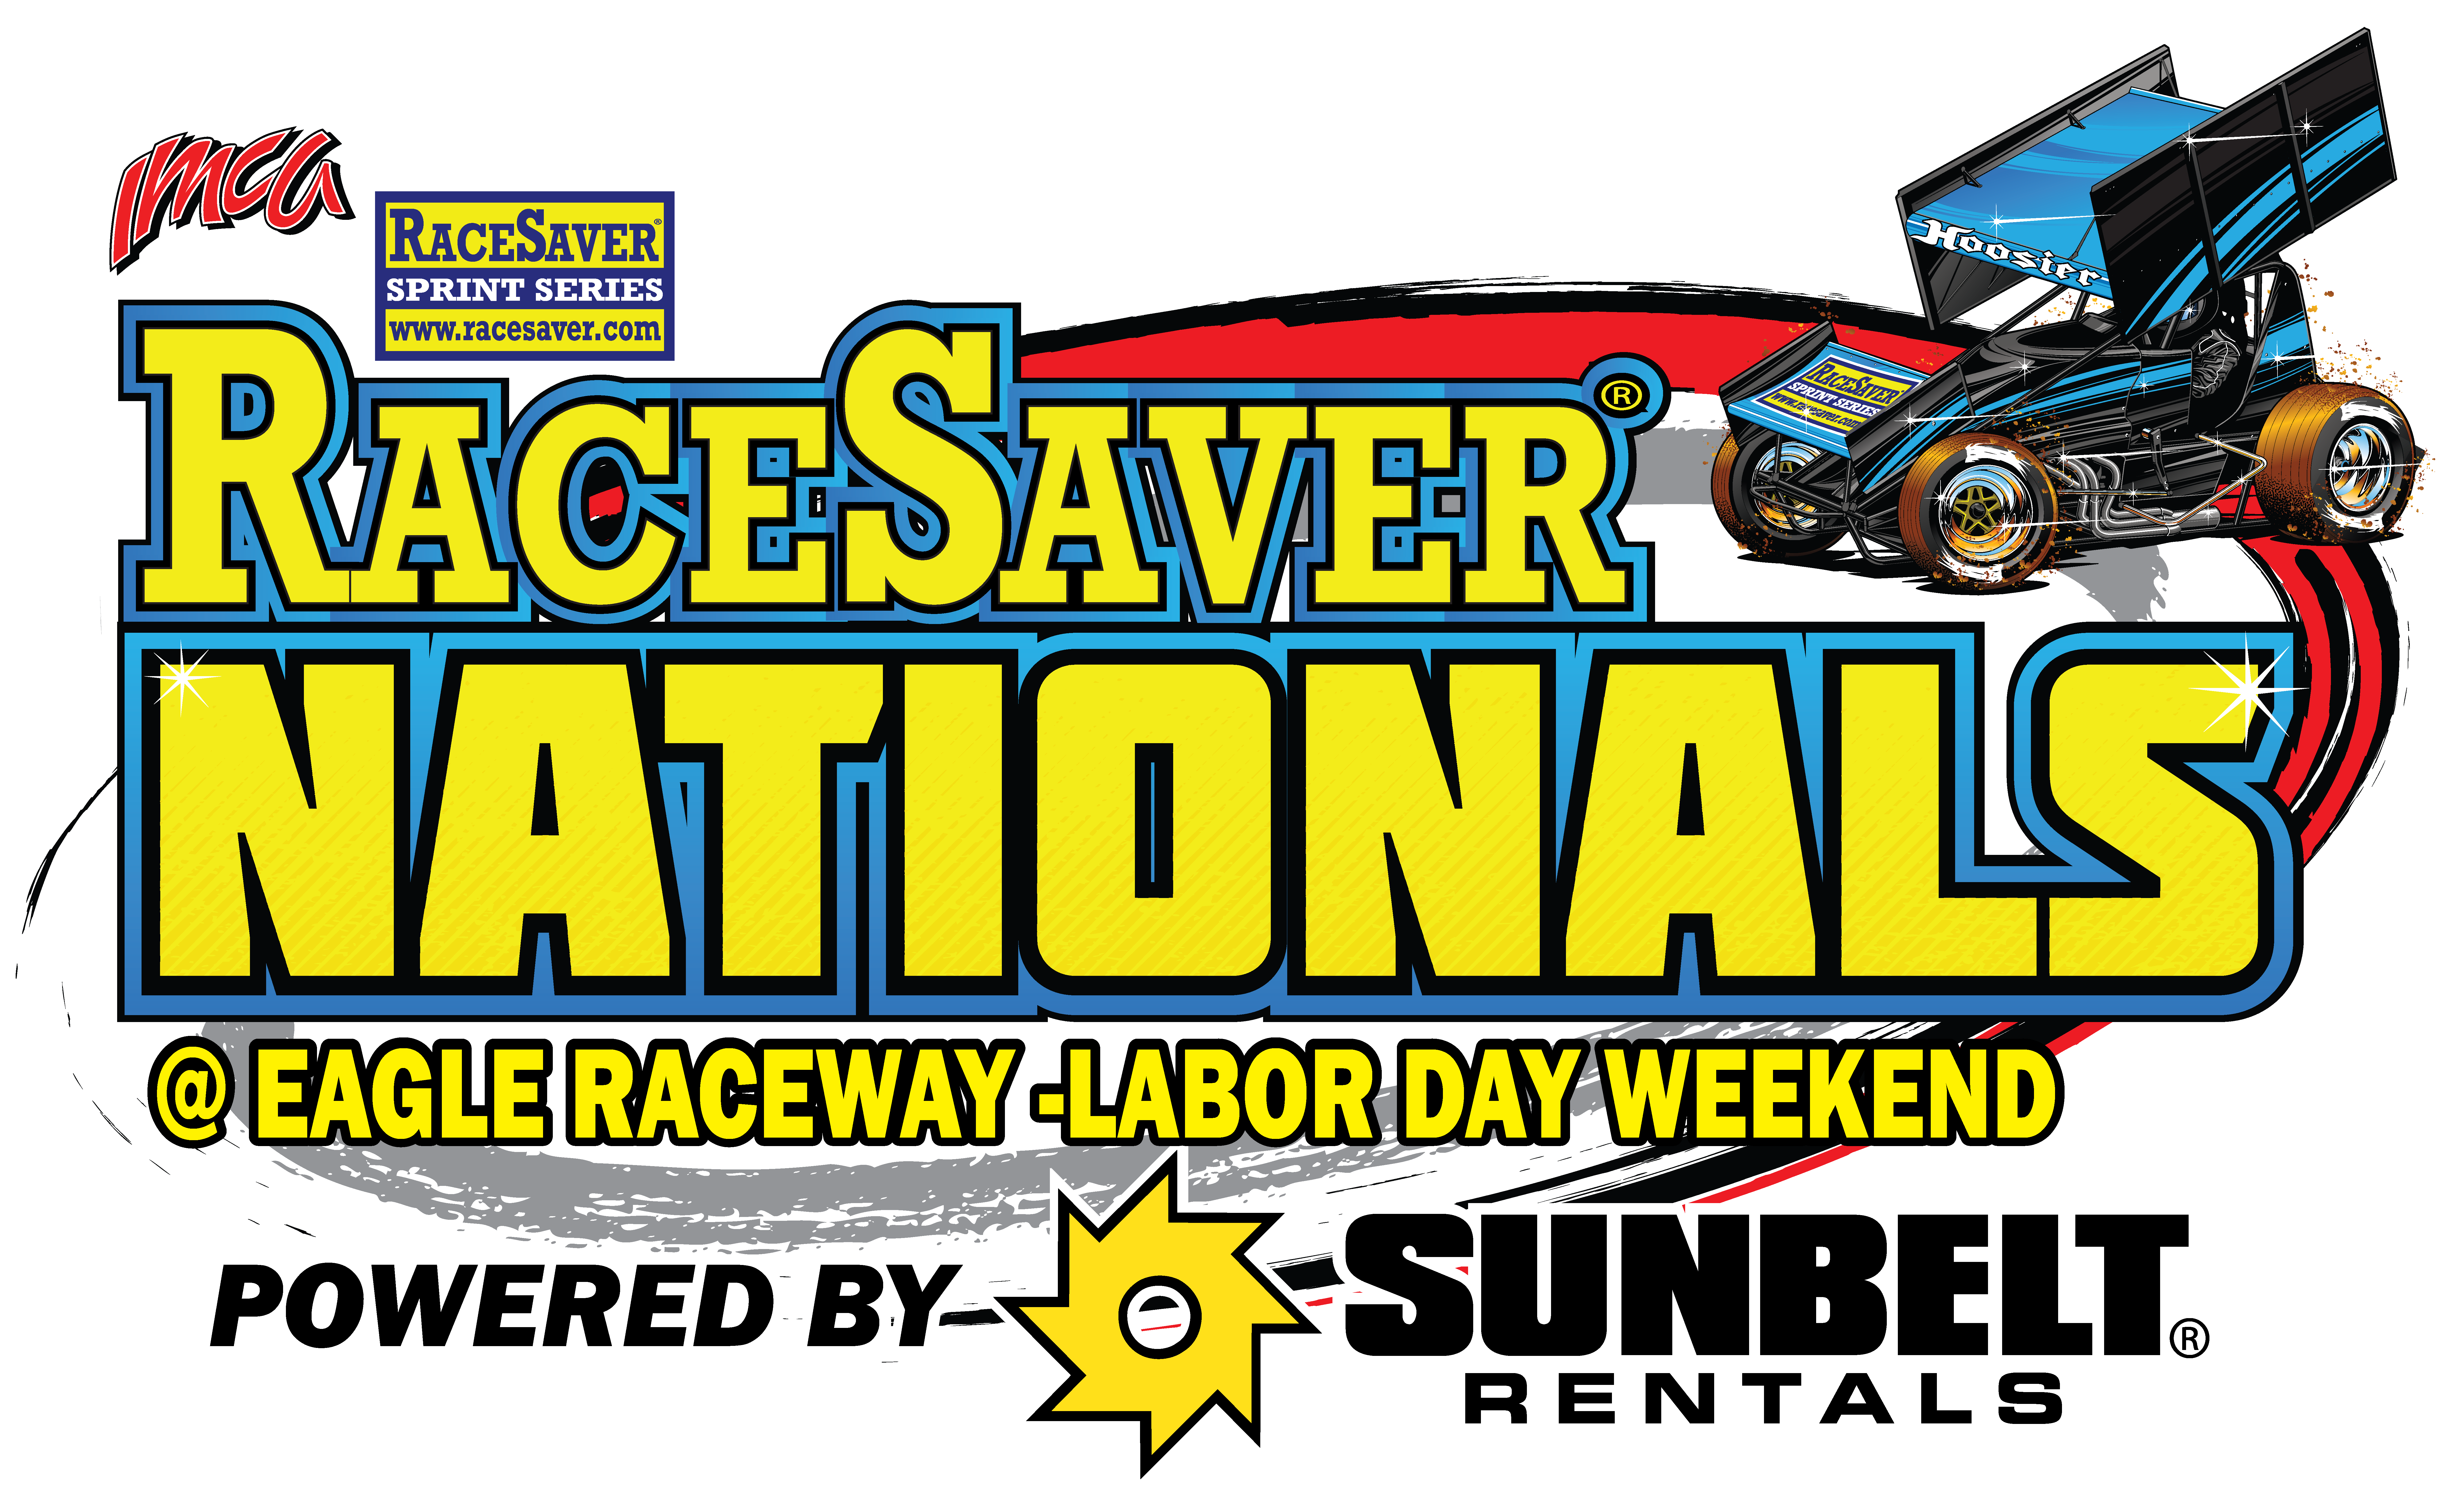 Saturday Portion of RaceSaver Nationals Info